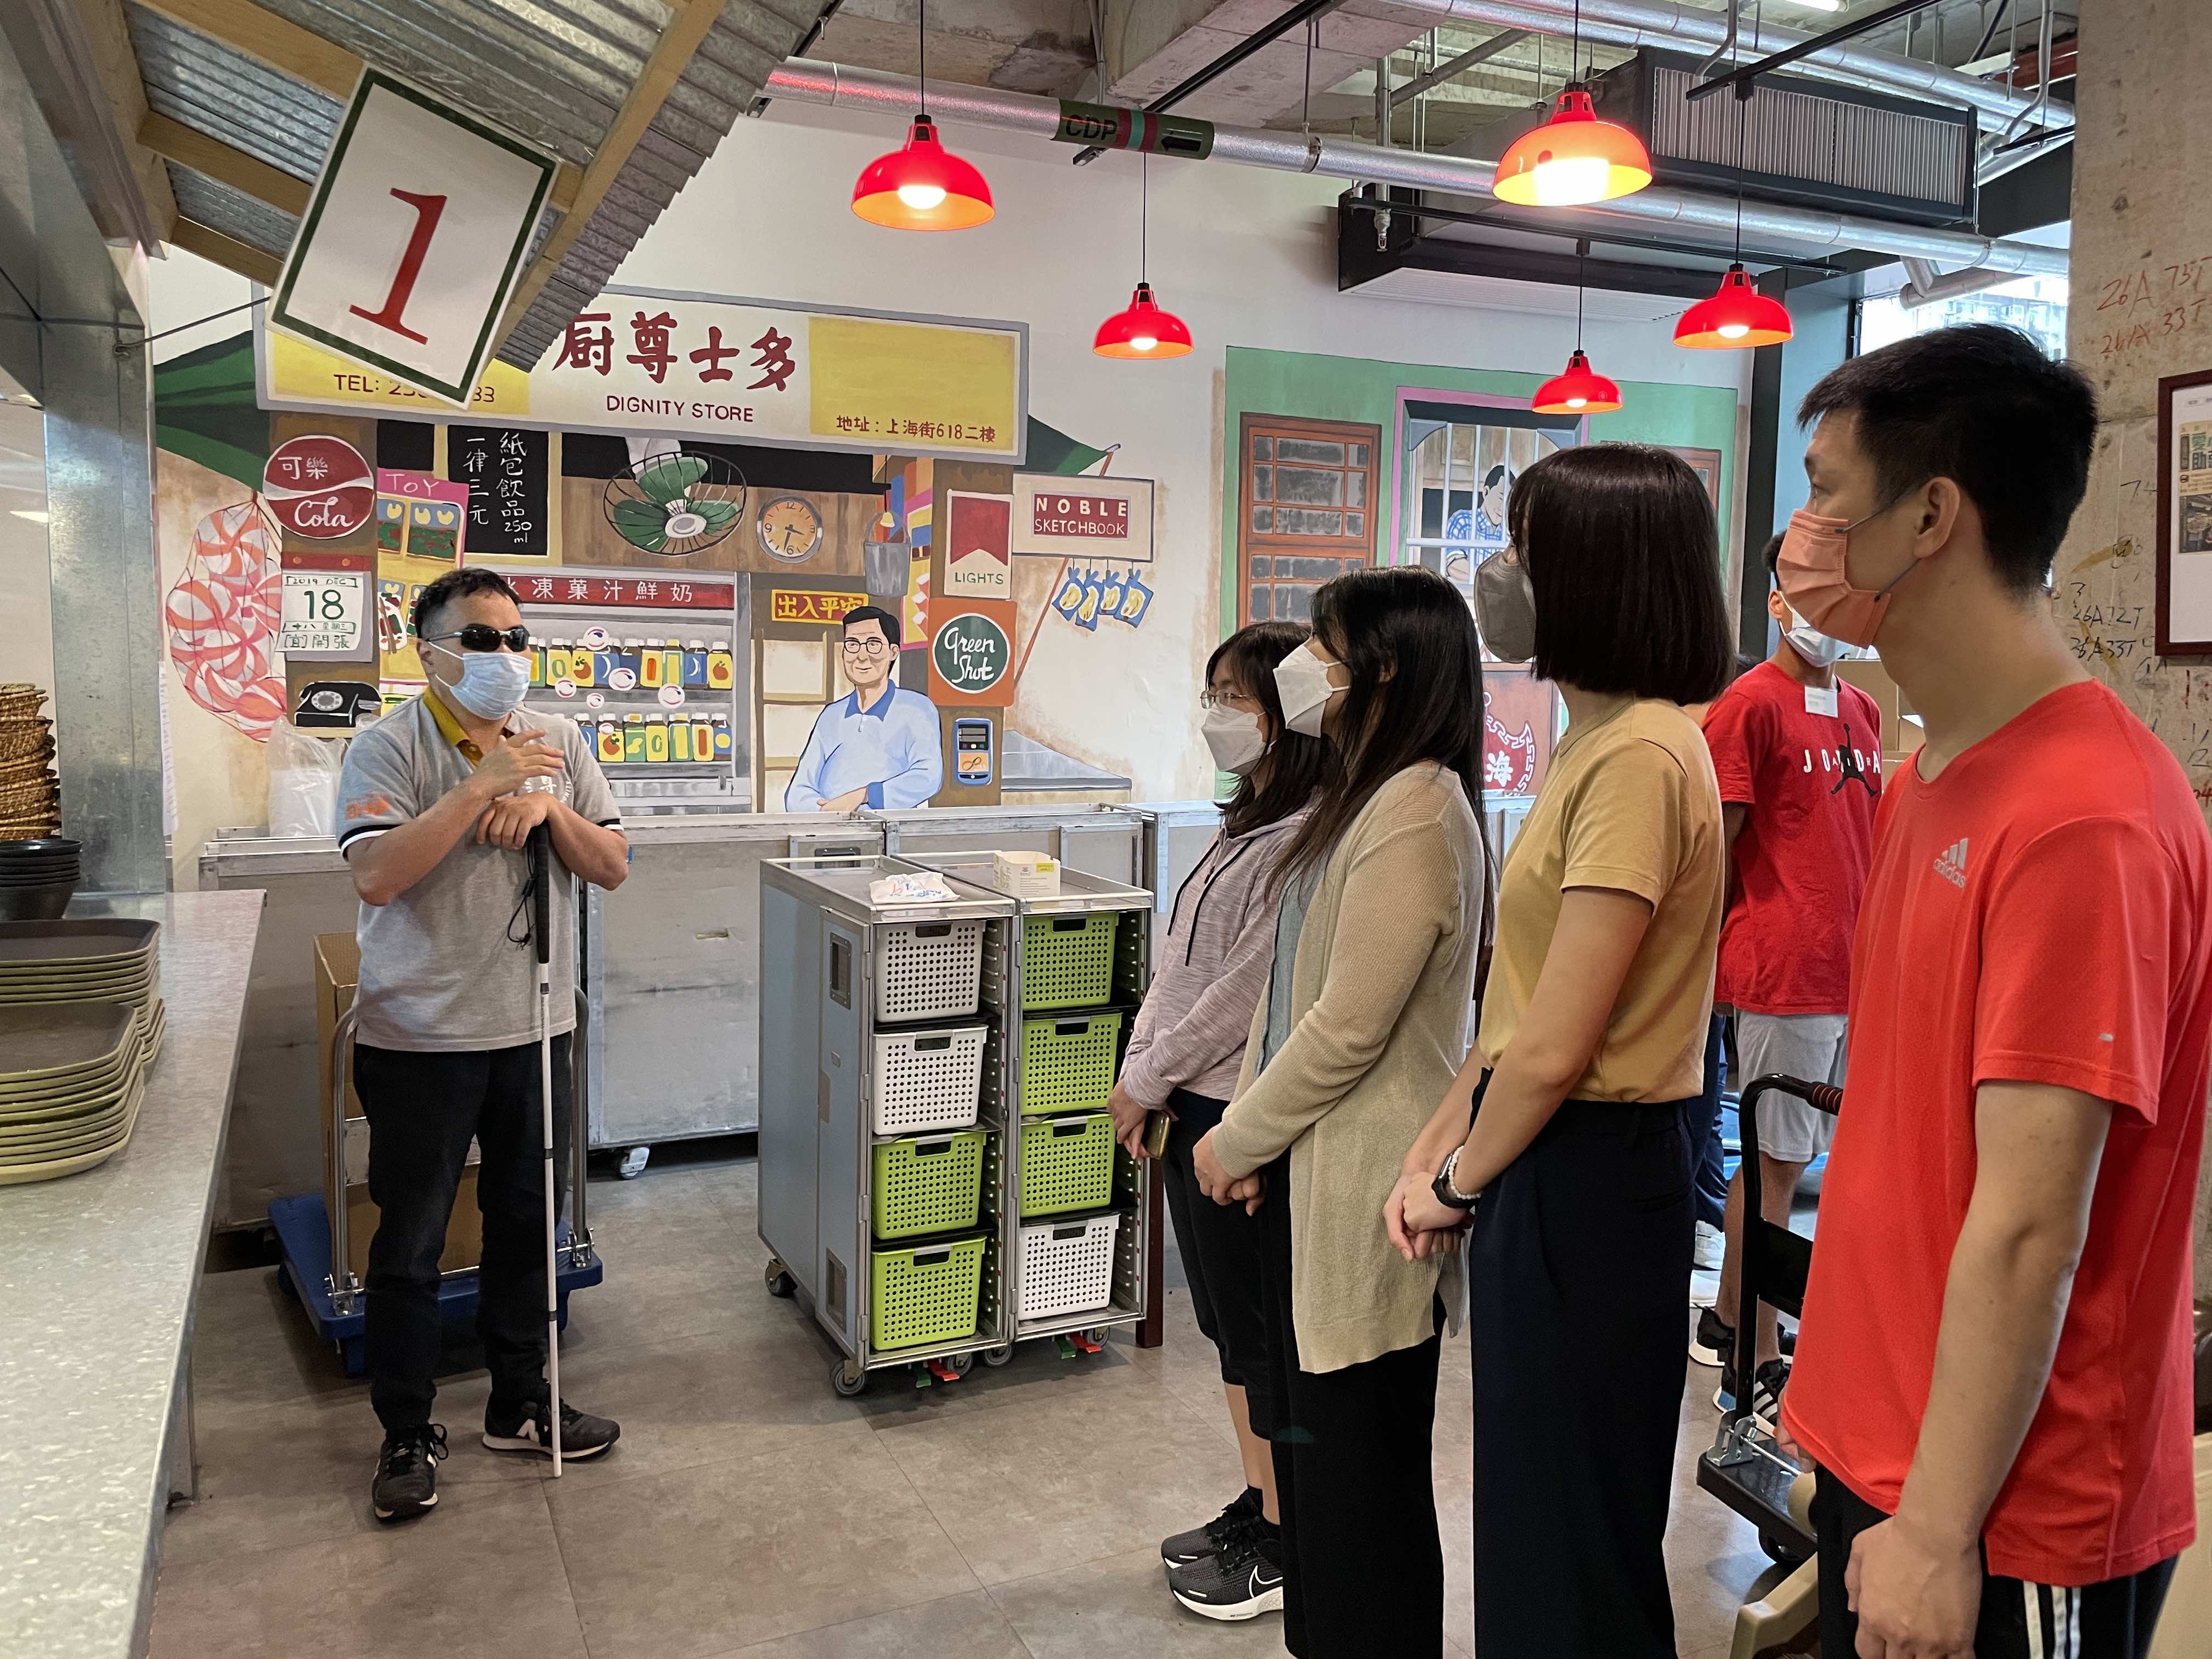 the Secretariat of the Paralympic Committee visited a social enterprise restaurant, "Kitchen Dignity", to provide volunteer services